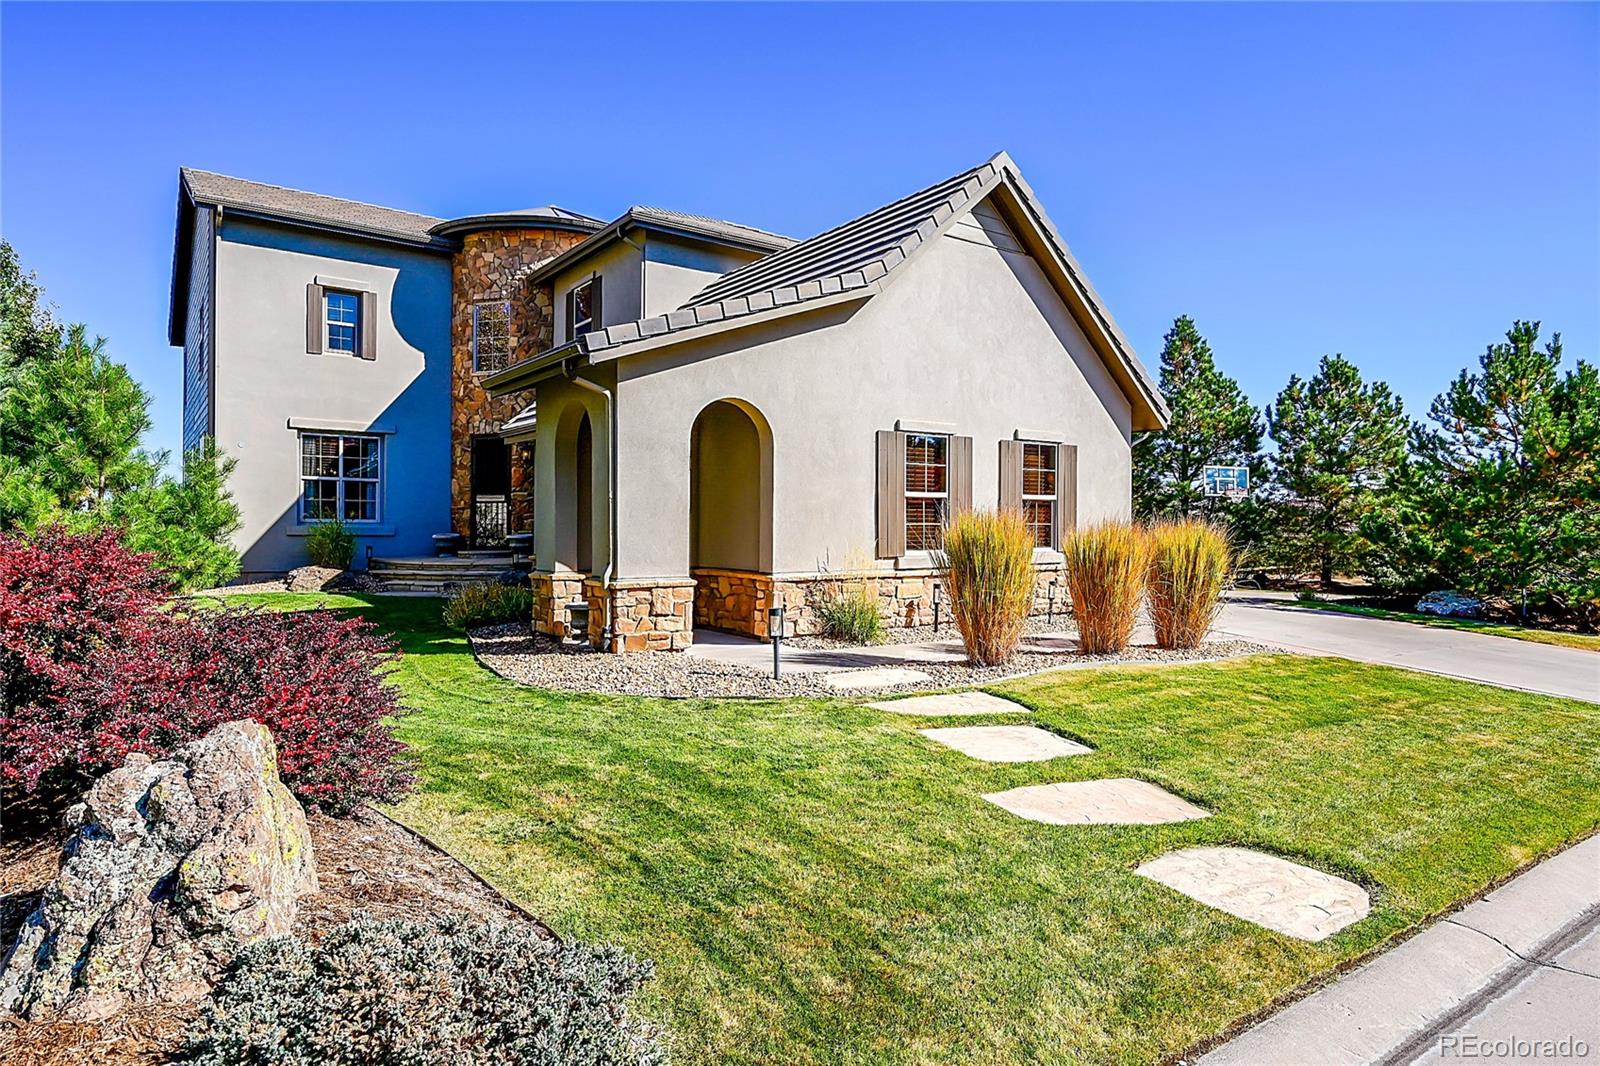 12542  daniels gate drive, castle pines sold home. Closed on 2024-02-28 for $1,345,000.